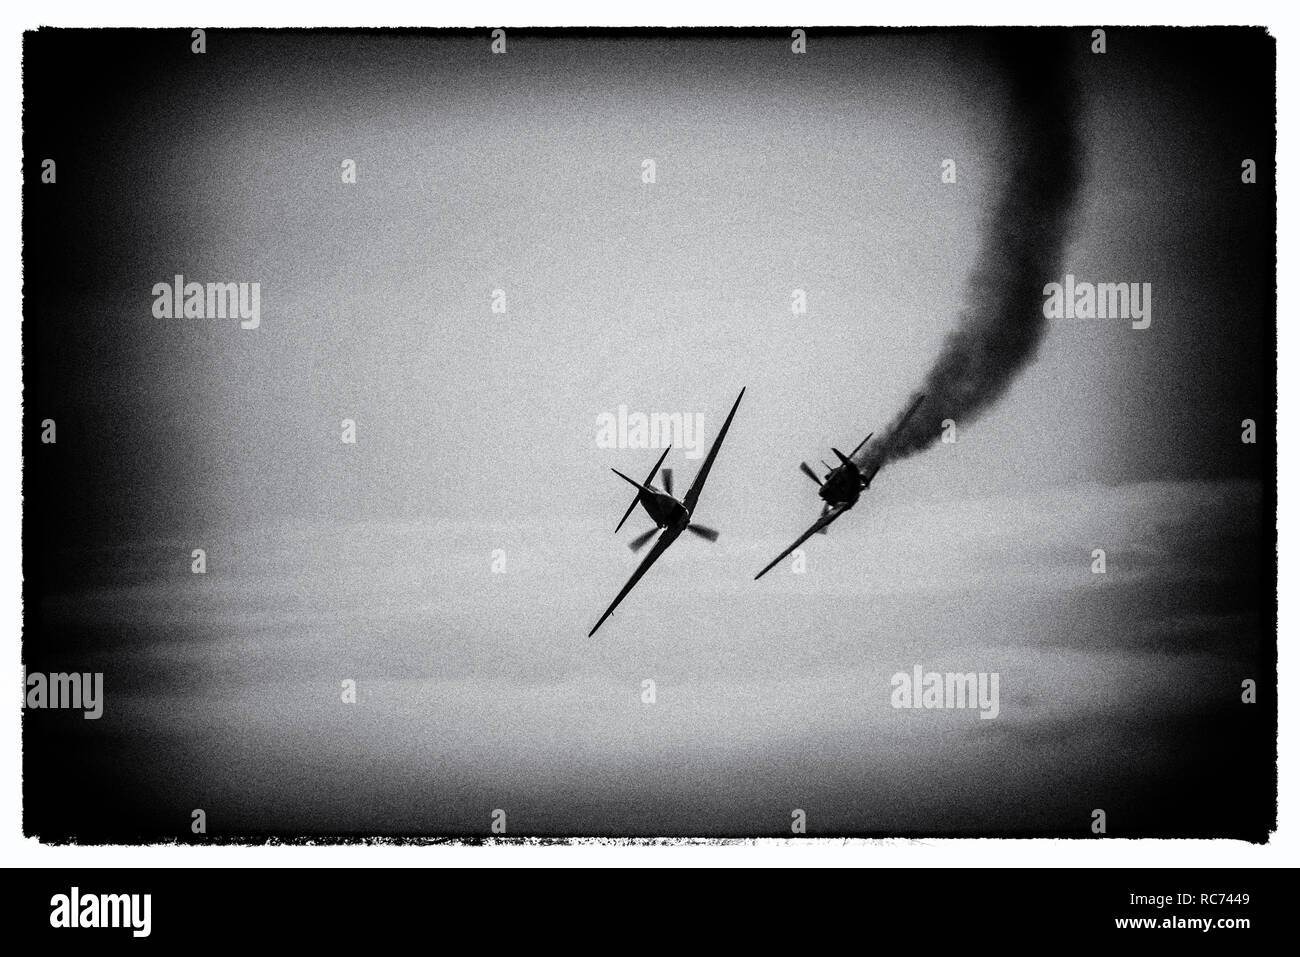 Second World War dogfight air warfare. A modern image processed to appear to show a gun camera photograph of World War Two air battle with plane smoke Stock Photo